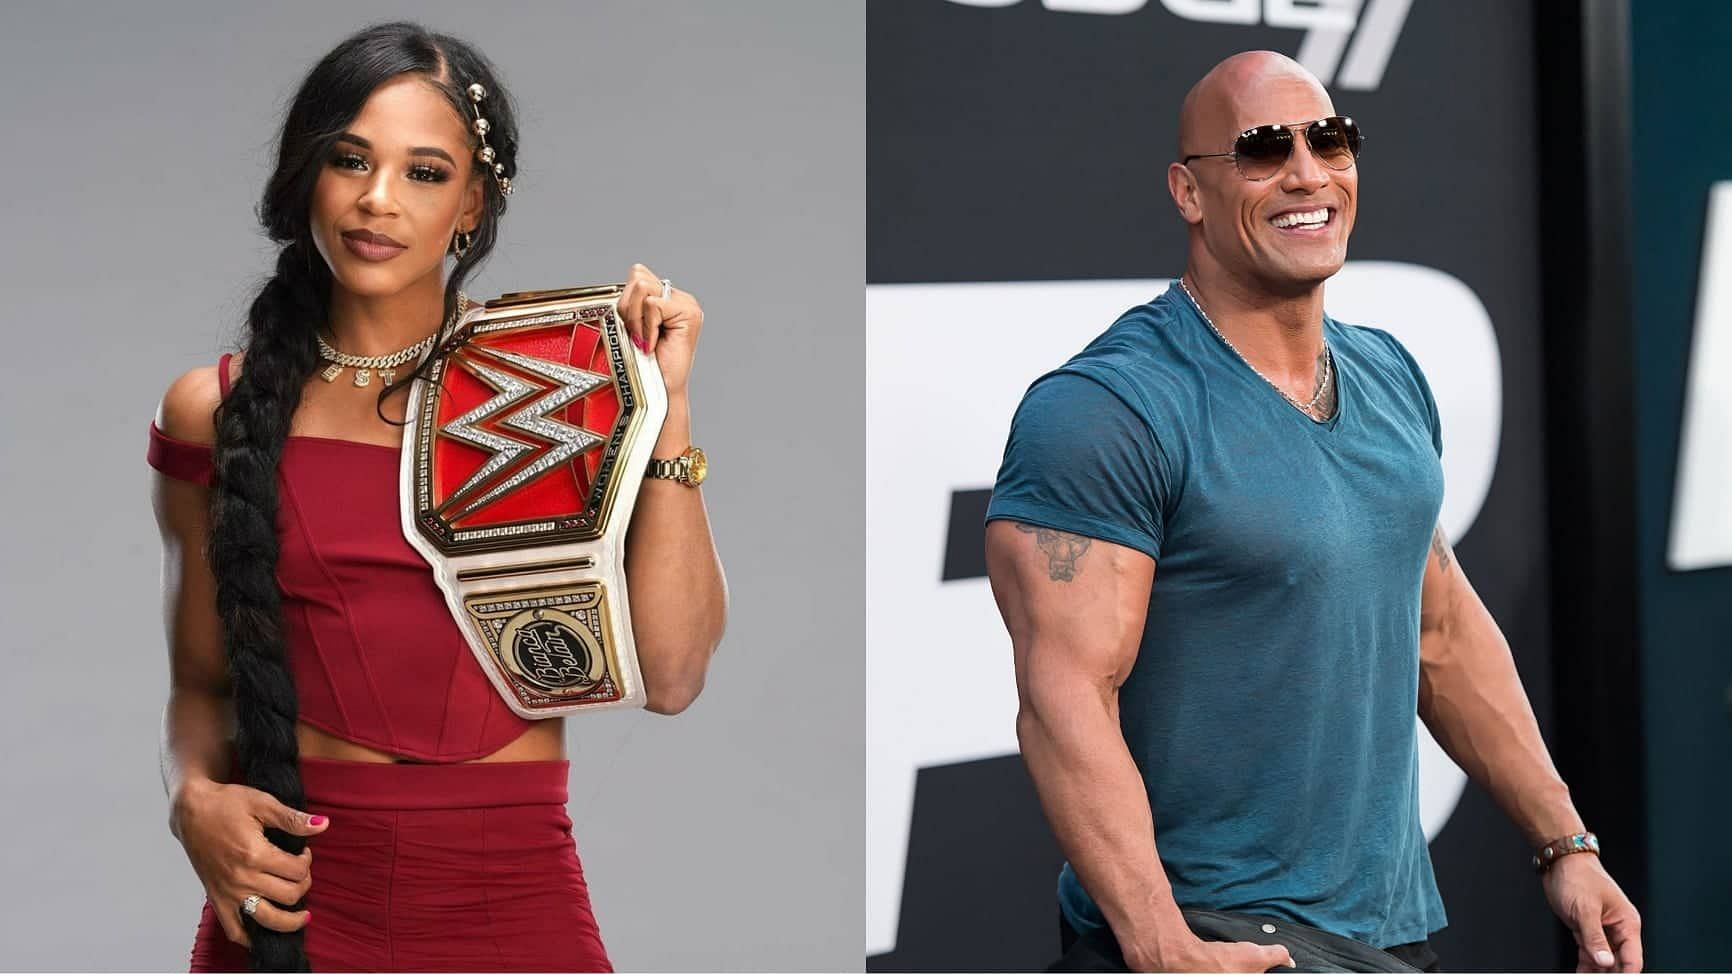 Bianca Belair (L) and The Rock (R)